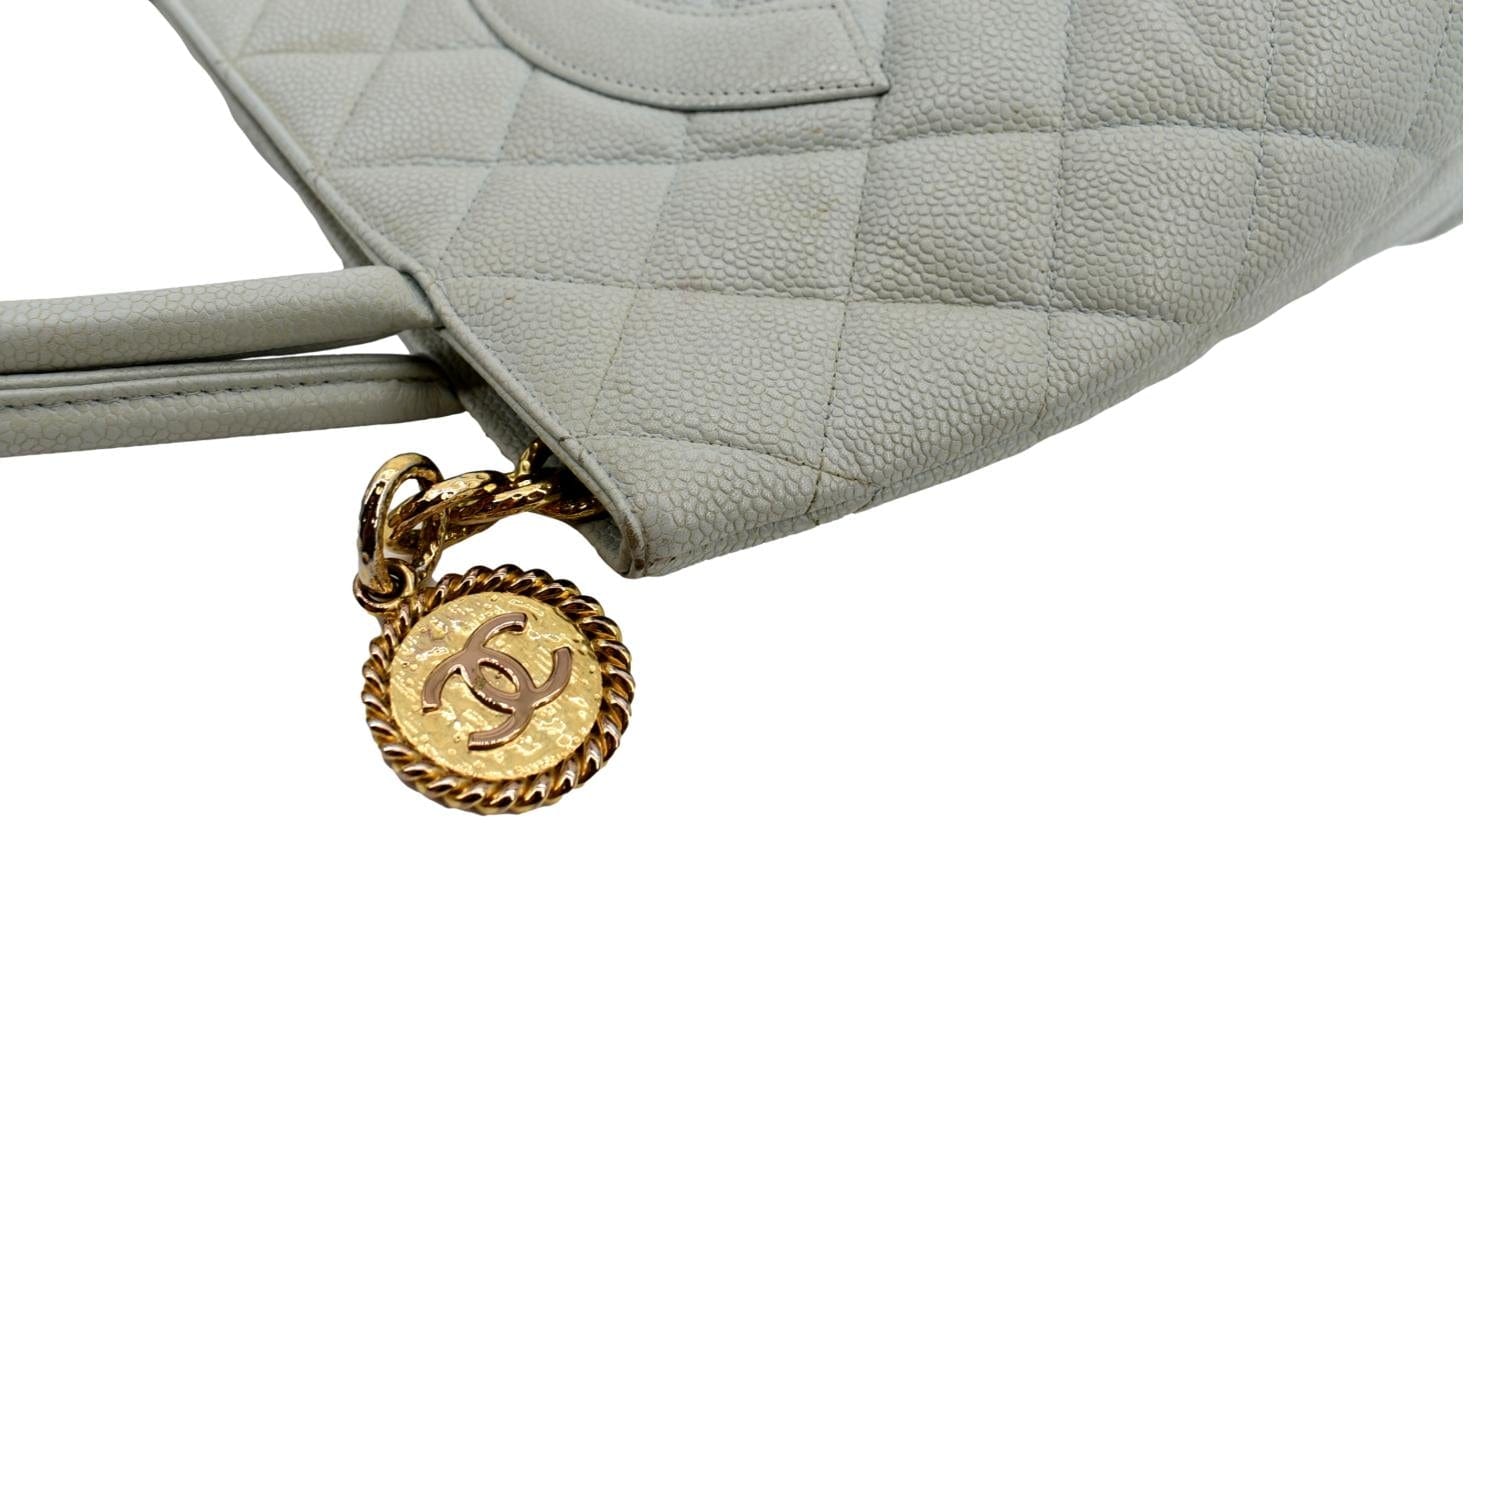 Bags, Authentic Chanel Quilted Caviar Medallion Tote